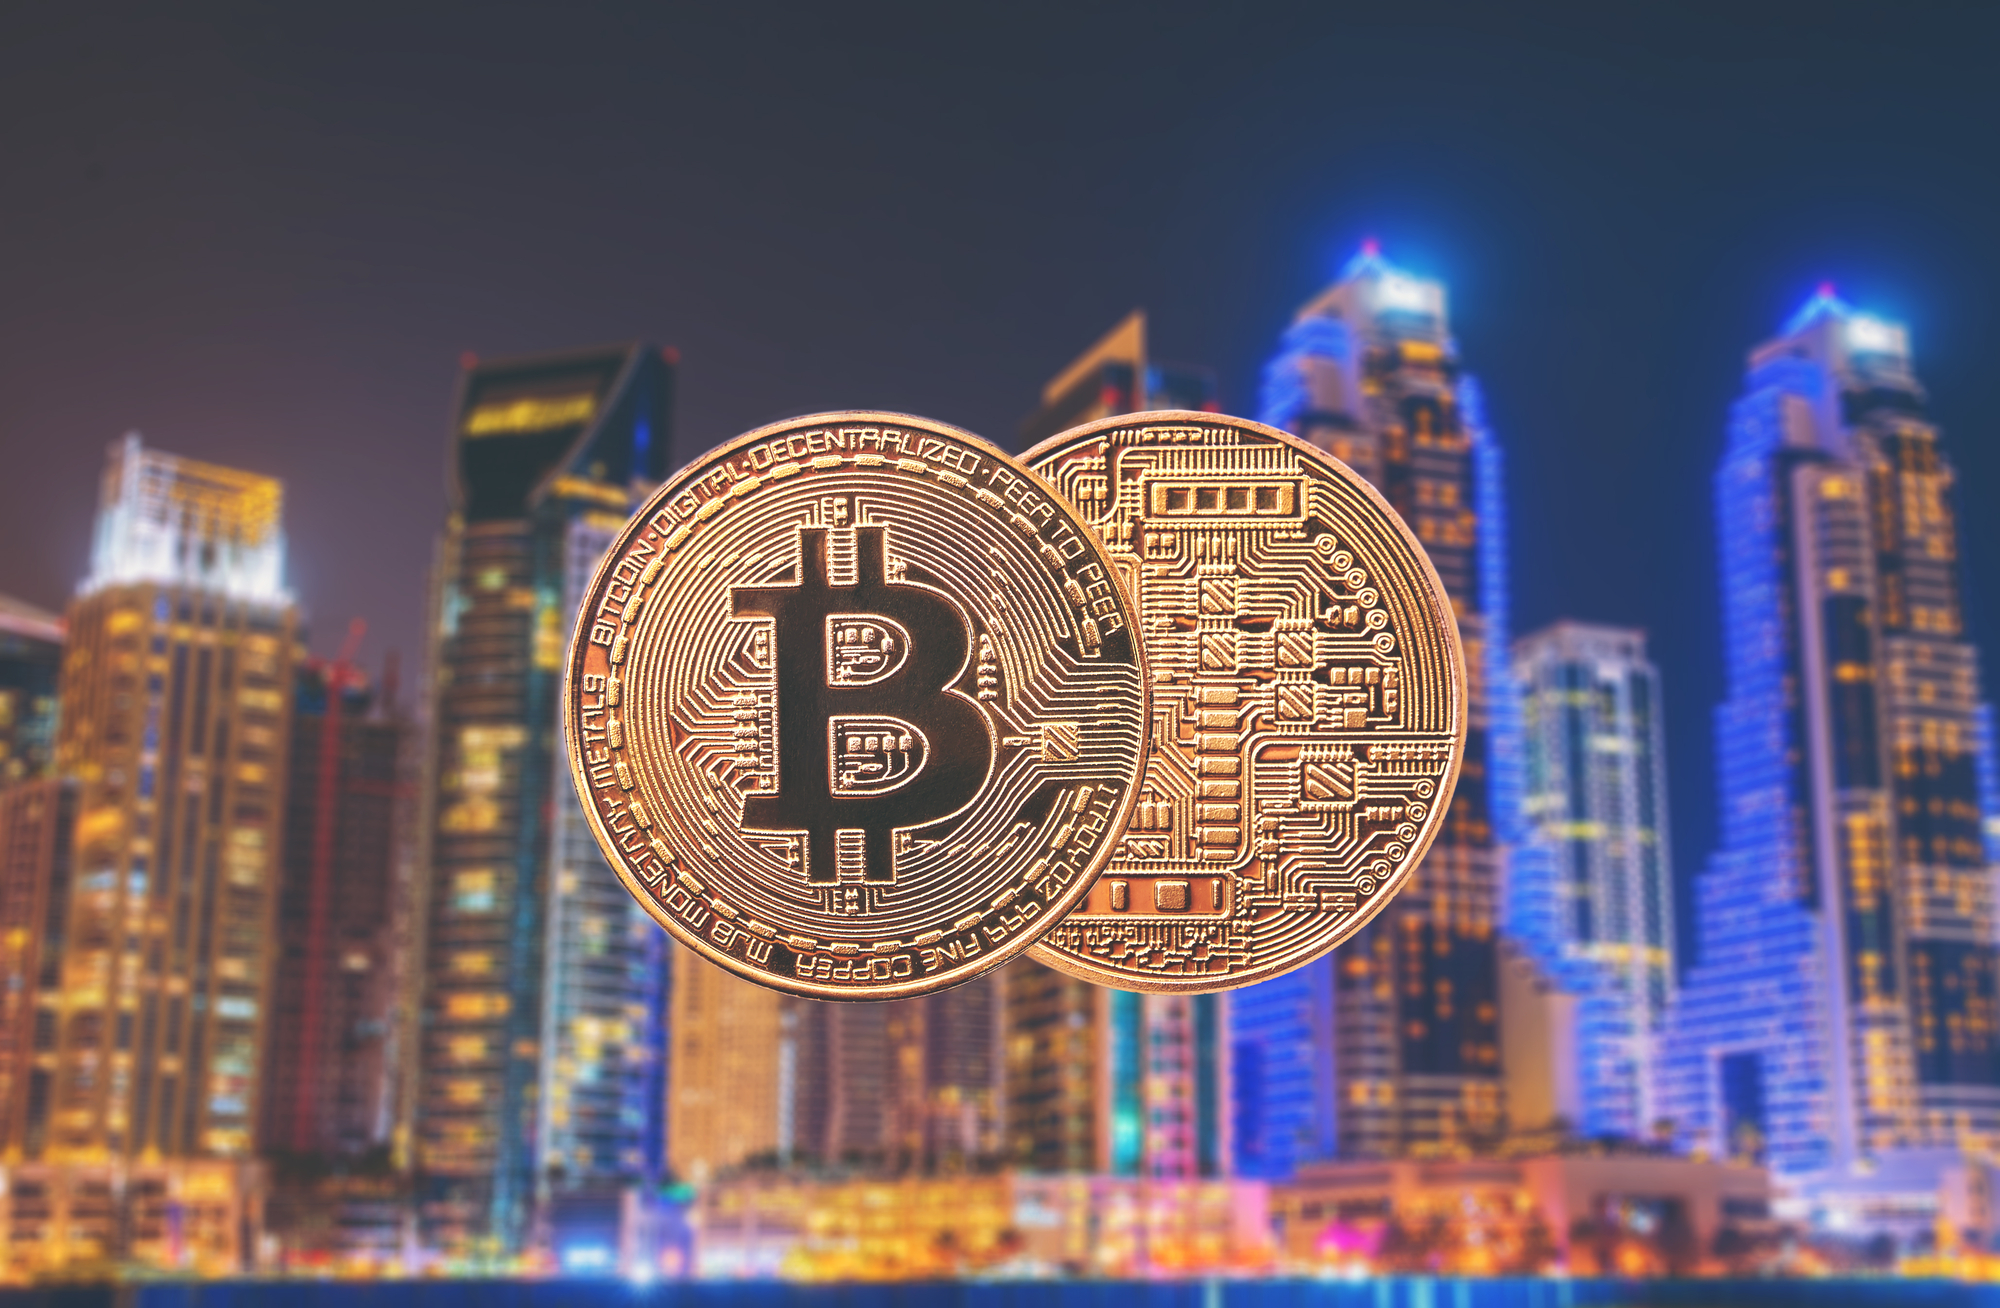 Dubai residents have lost Dh80 million to crypto scams in 2021: How to secure yourself?